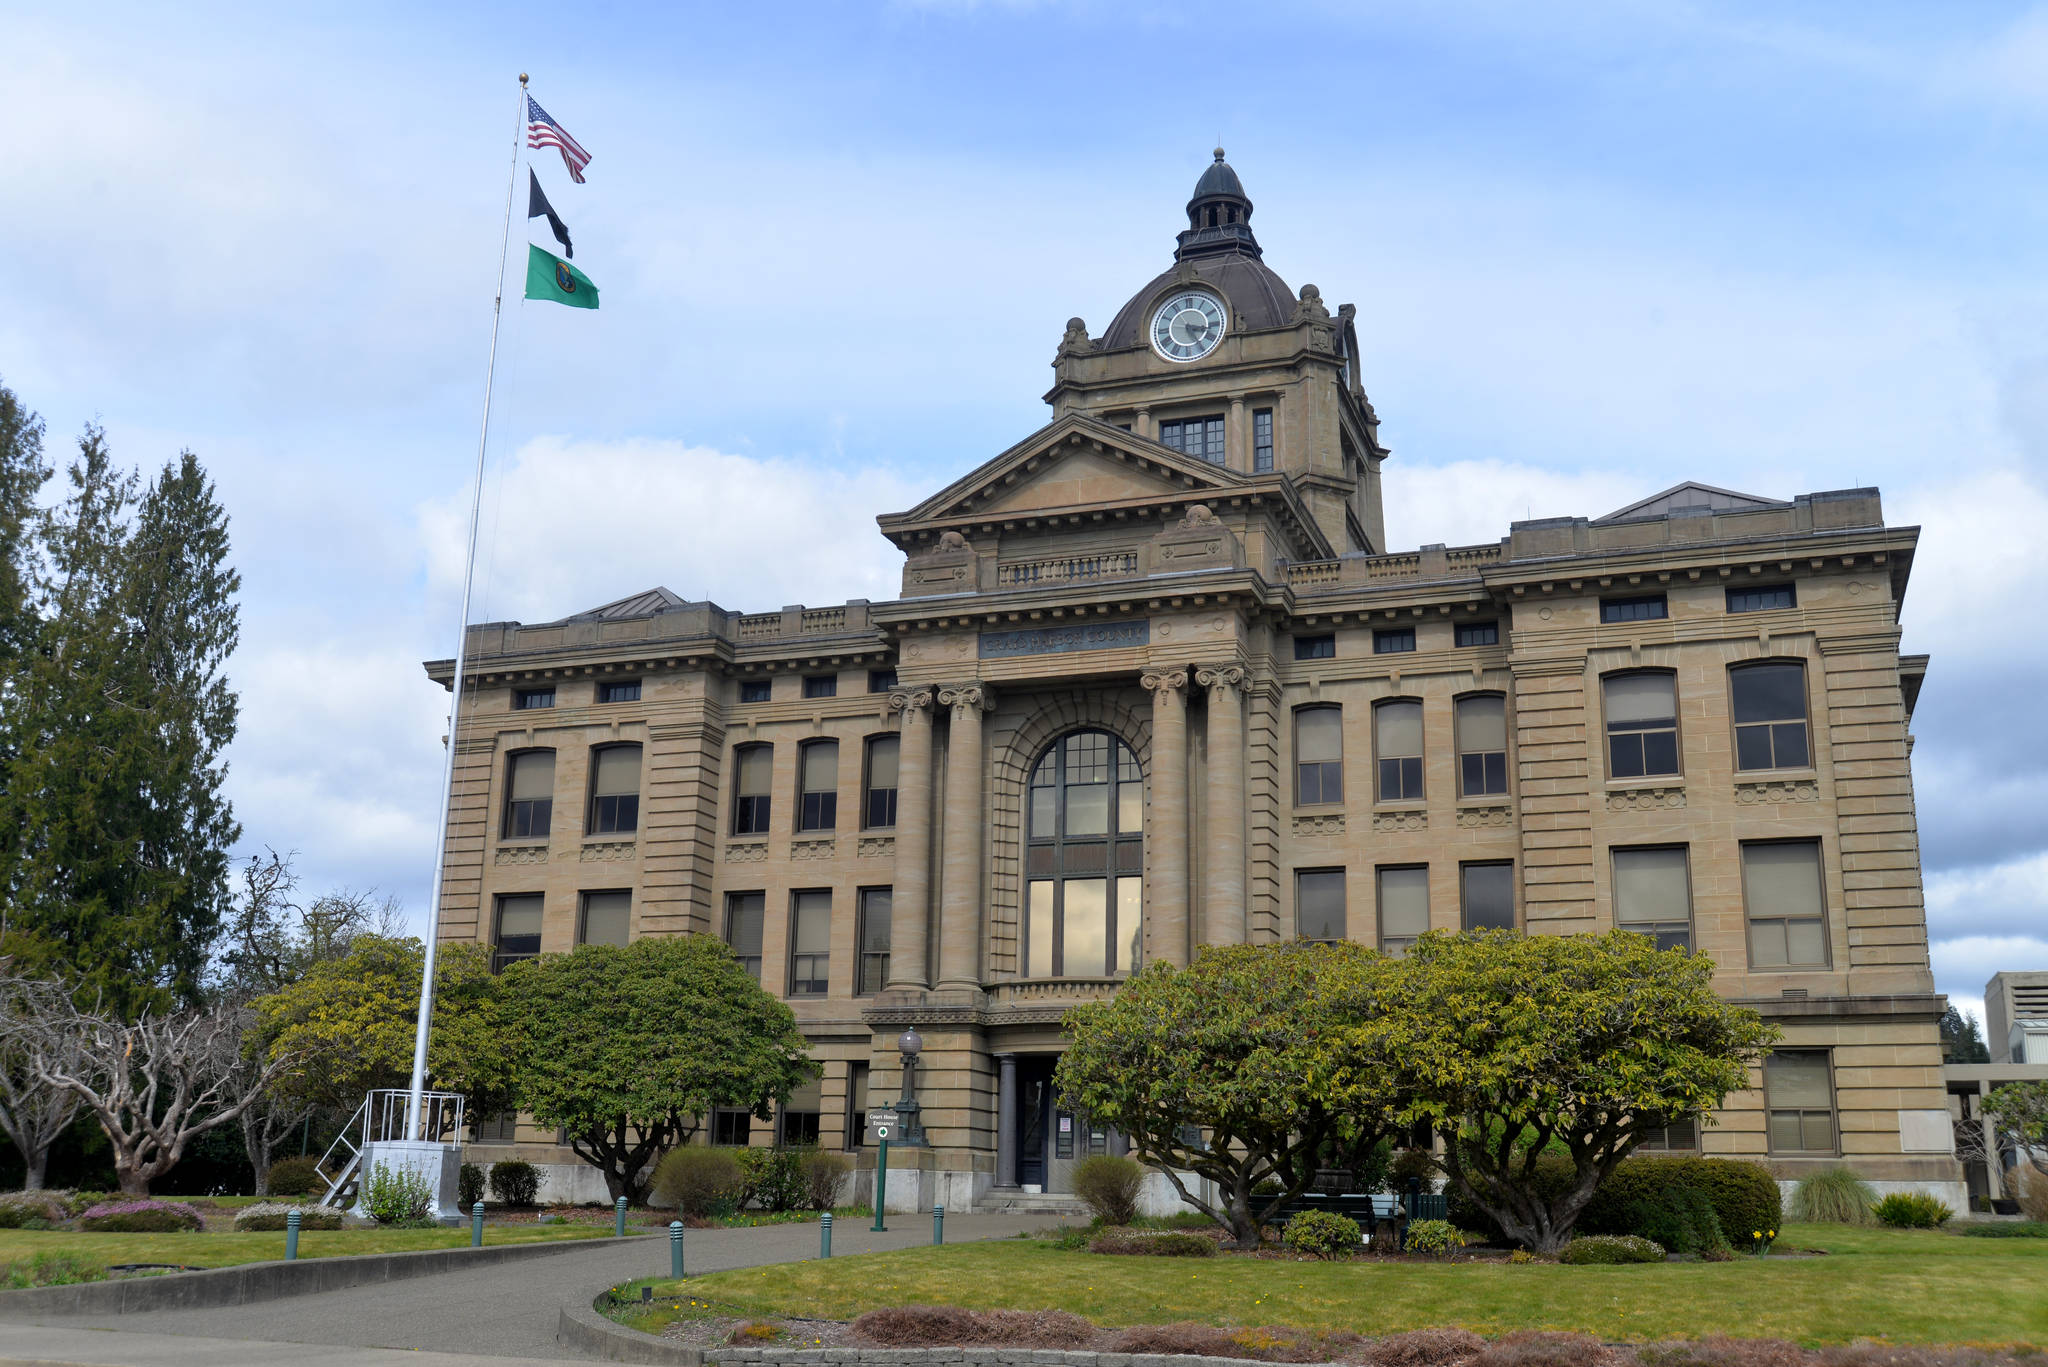 DAVE HAVILAND THE DAILY WORLD The Grays Harbor County Courthouse at 102 West Broadway in Montesano